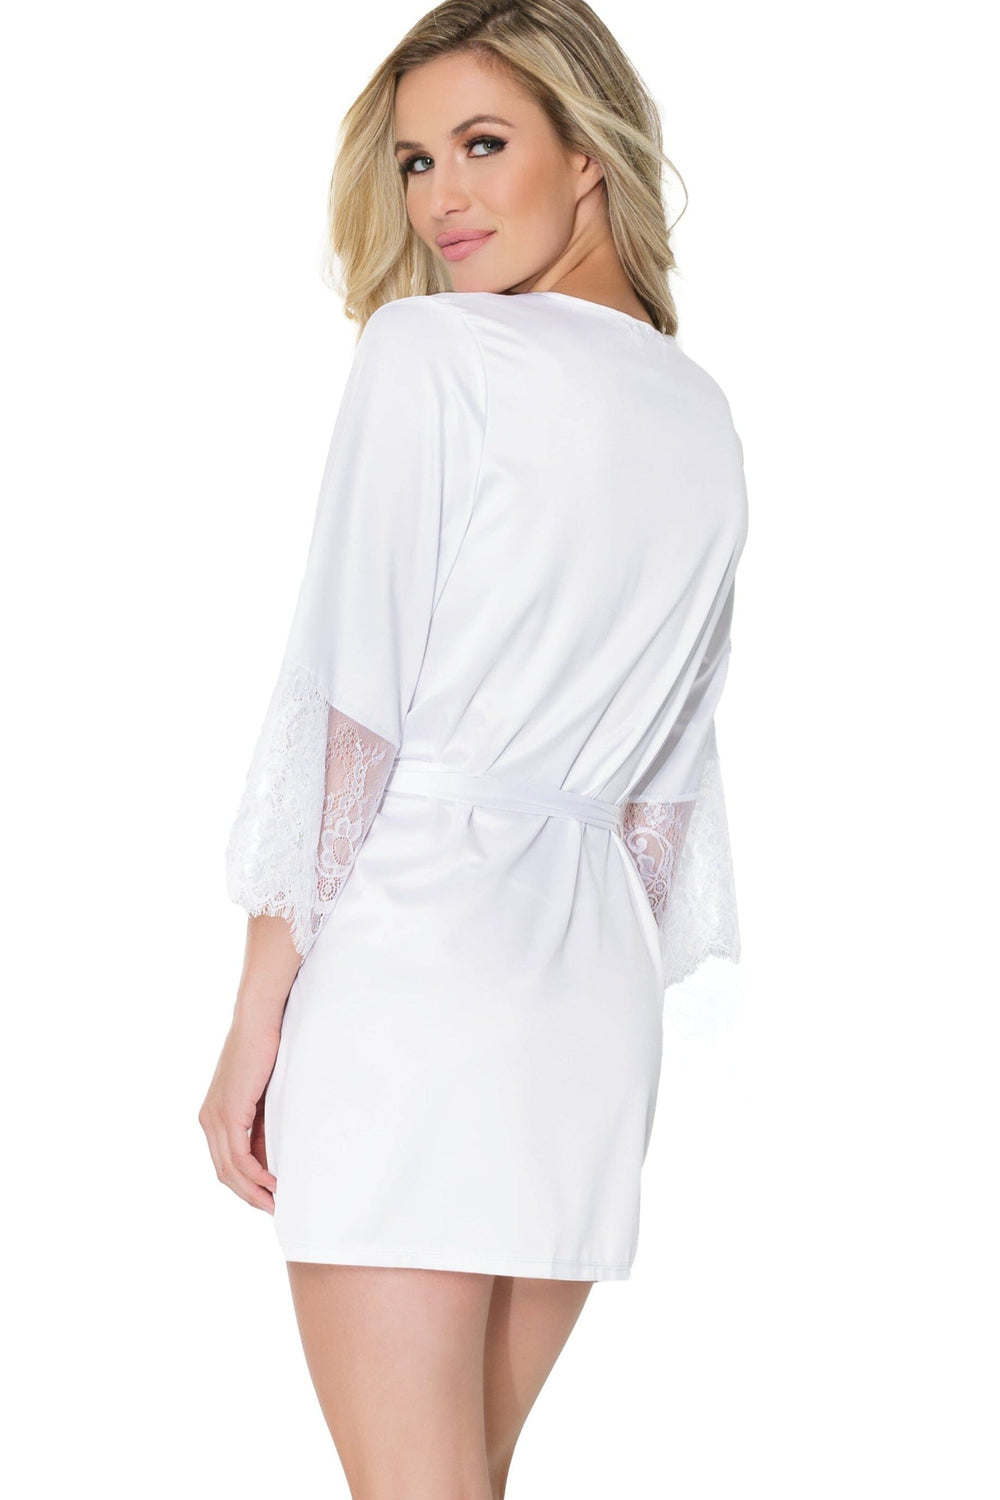 Satin Robe With Eyelash Lace Sleeves-Gowns + Robes-Coquette-White-O/S-SEXYSHOES.COM